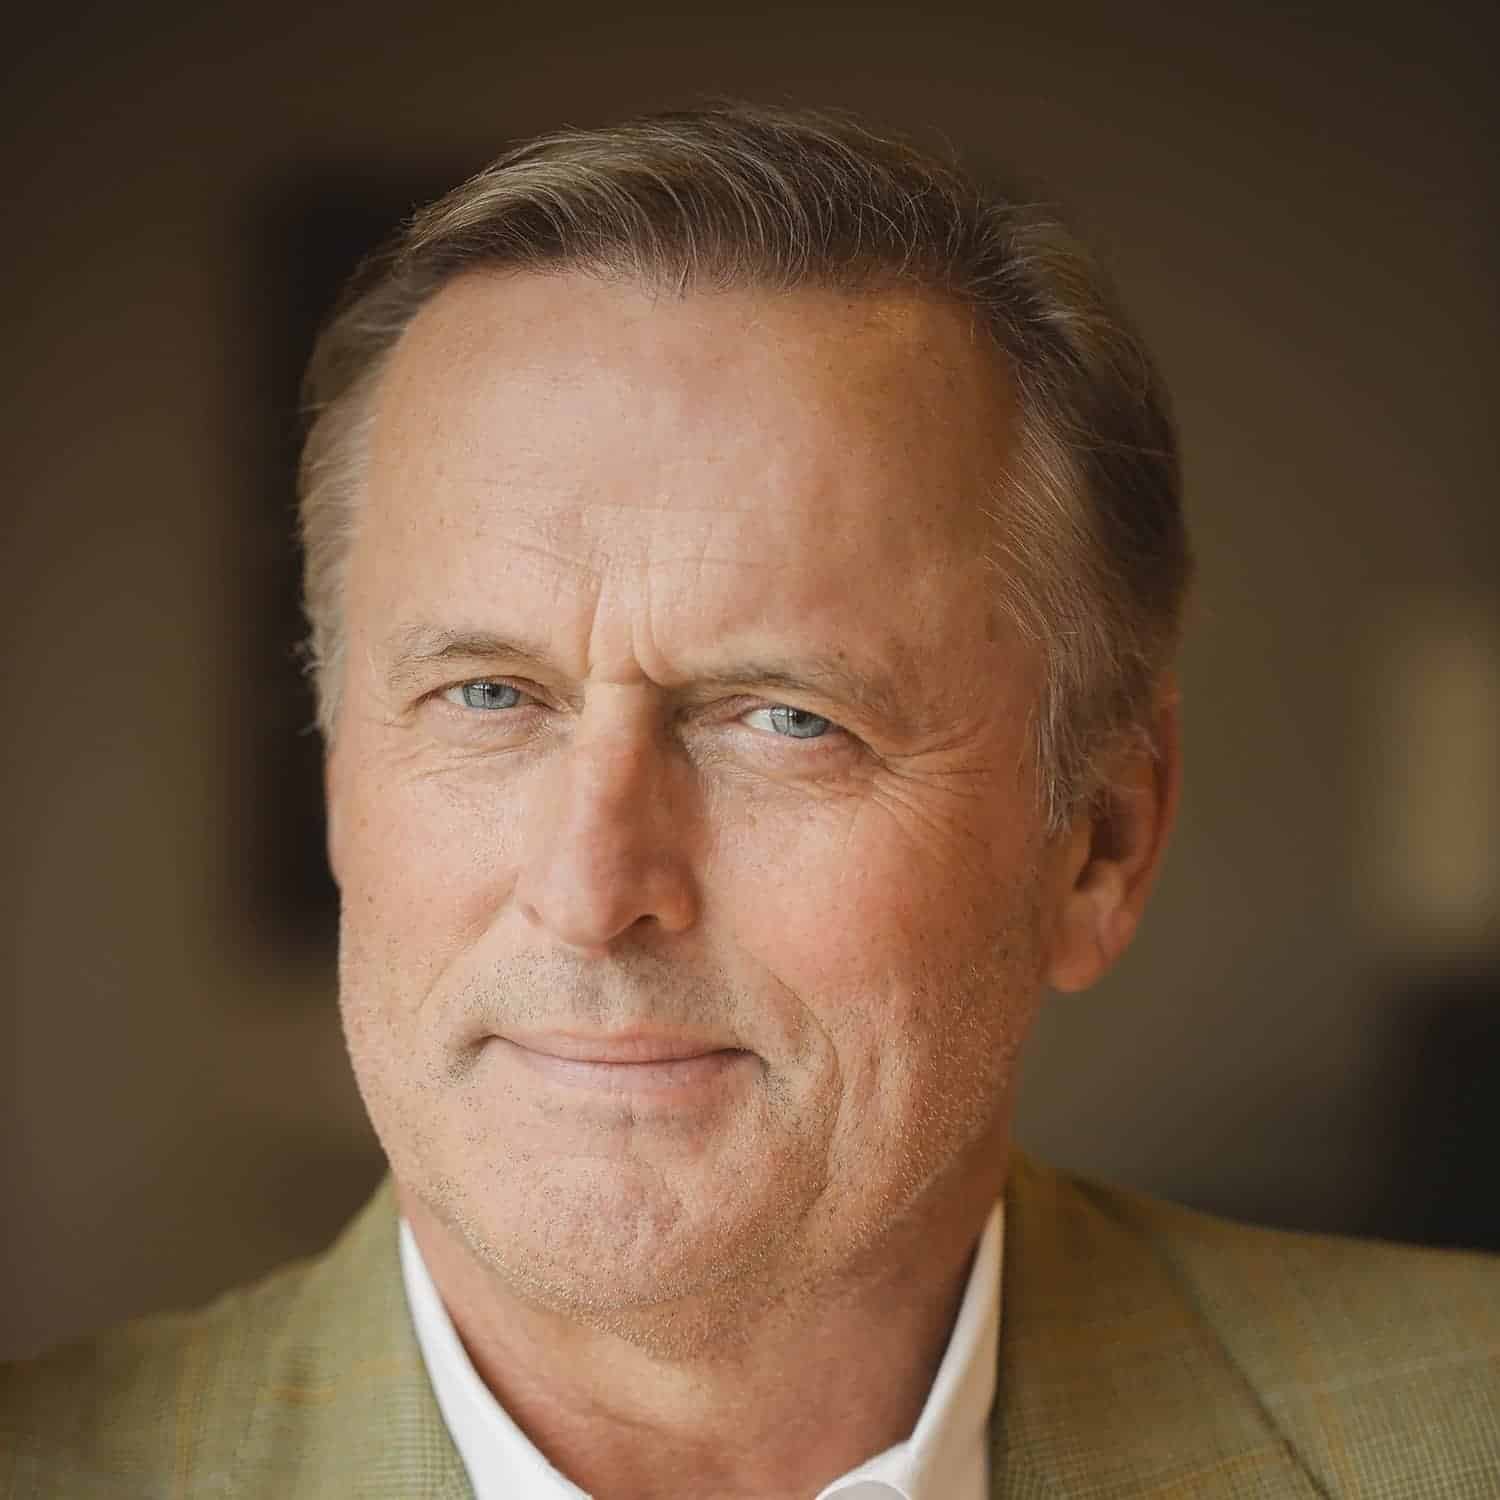 John Grisham’s tale of two cities: Oxford, Charlottesville